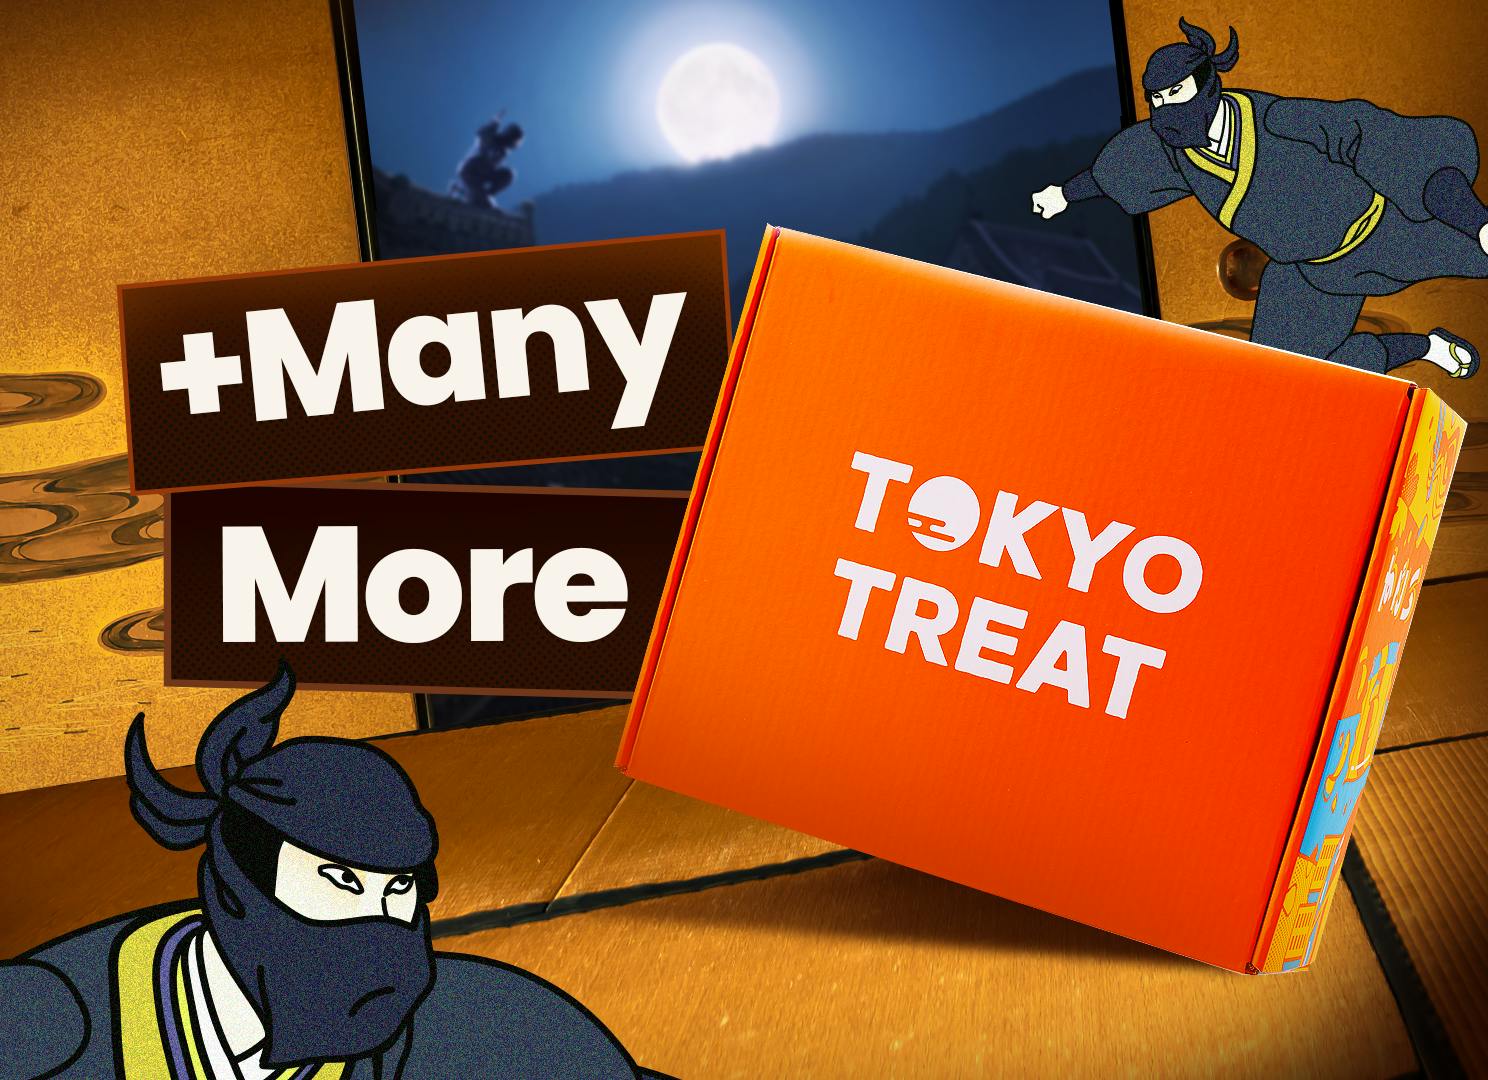 The TokyoTreat box sits on a tatami-lined floor of a traditional Japanese home, surrounded by ninjas.